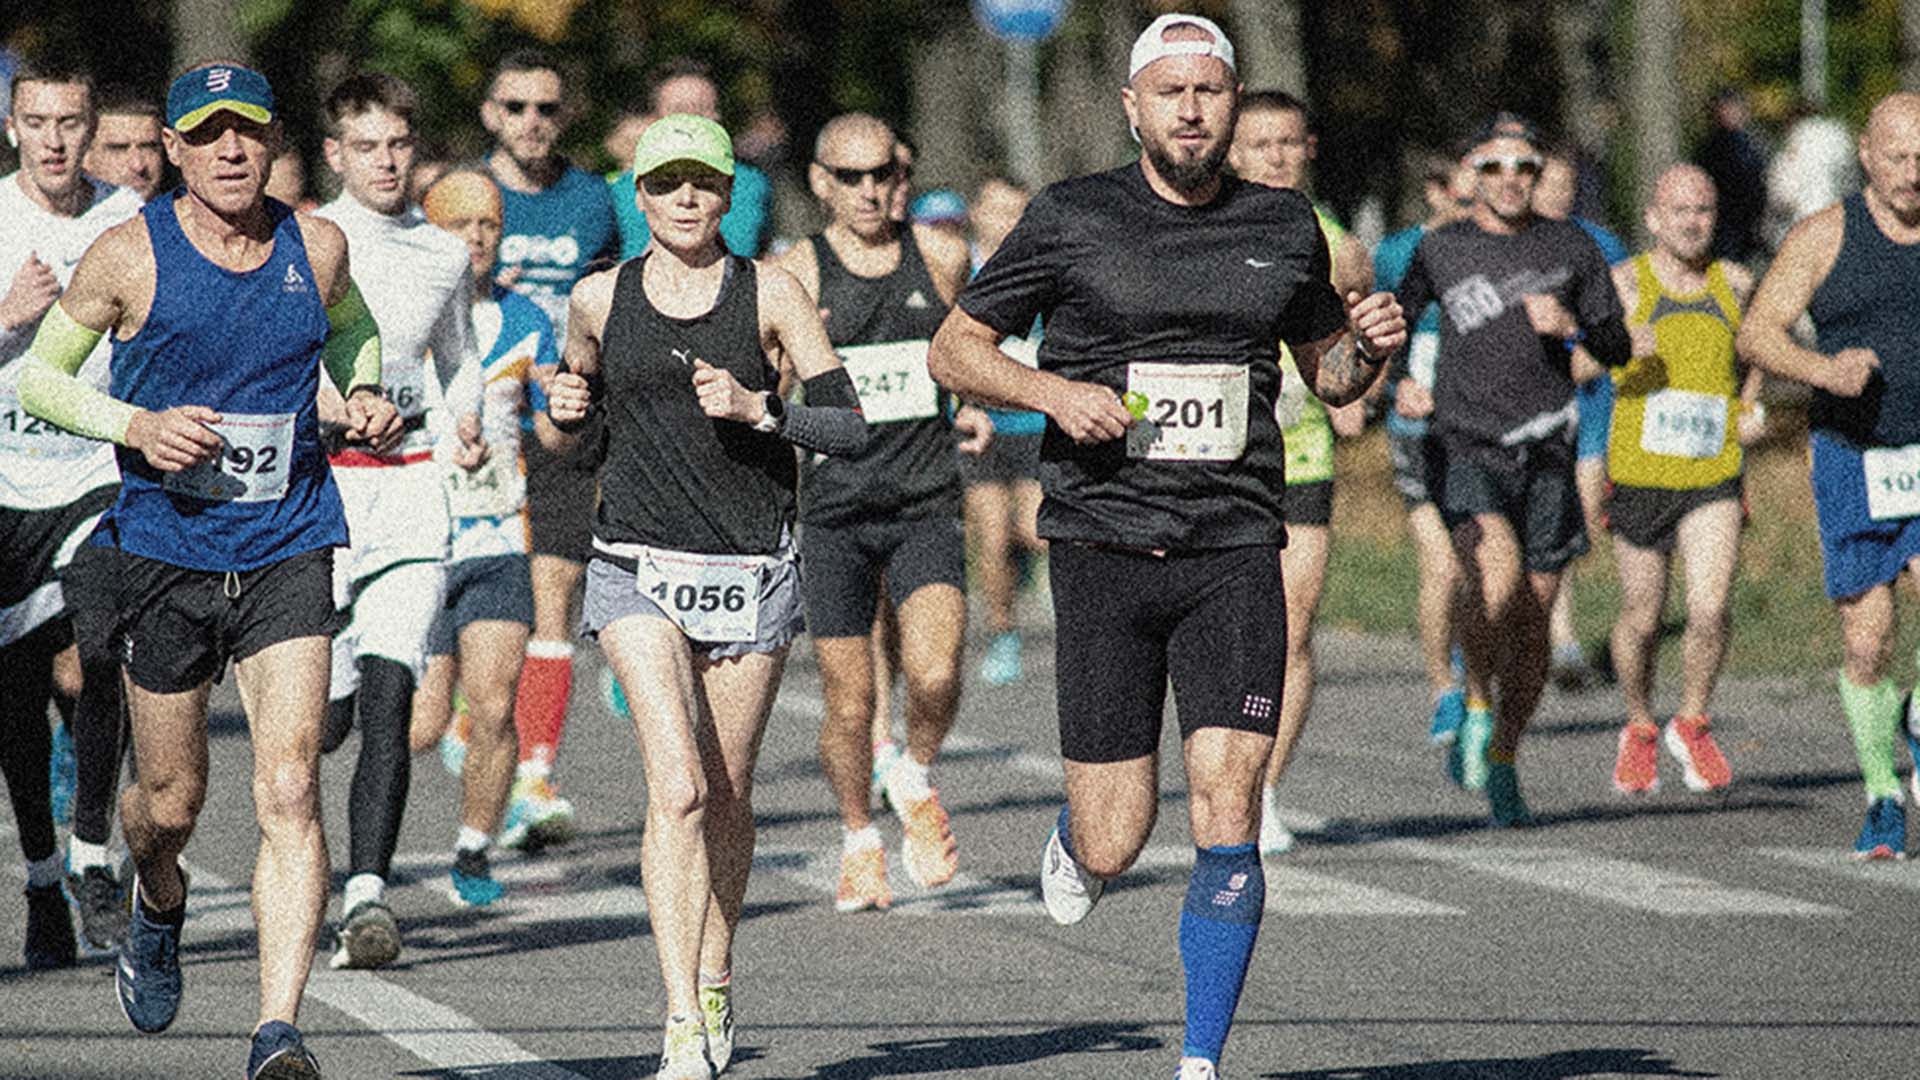 Photo of marathon runners at a race, approaching the camera.